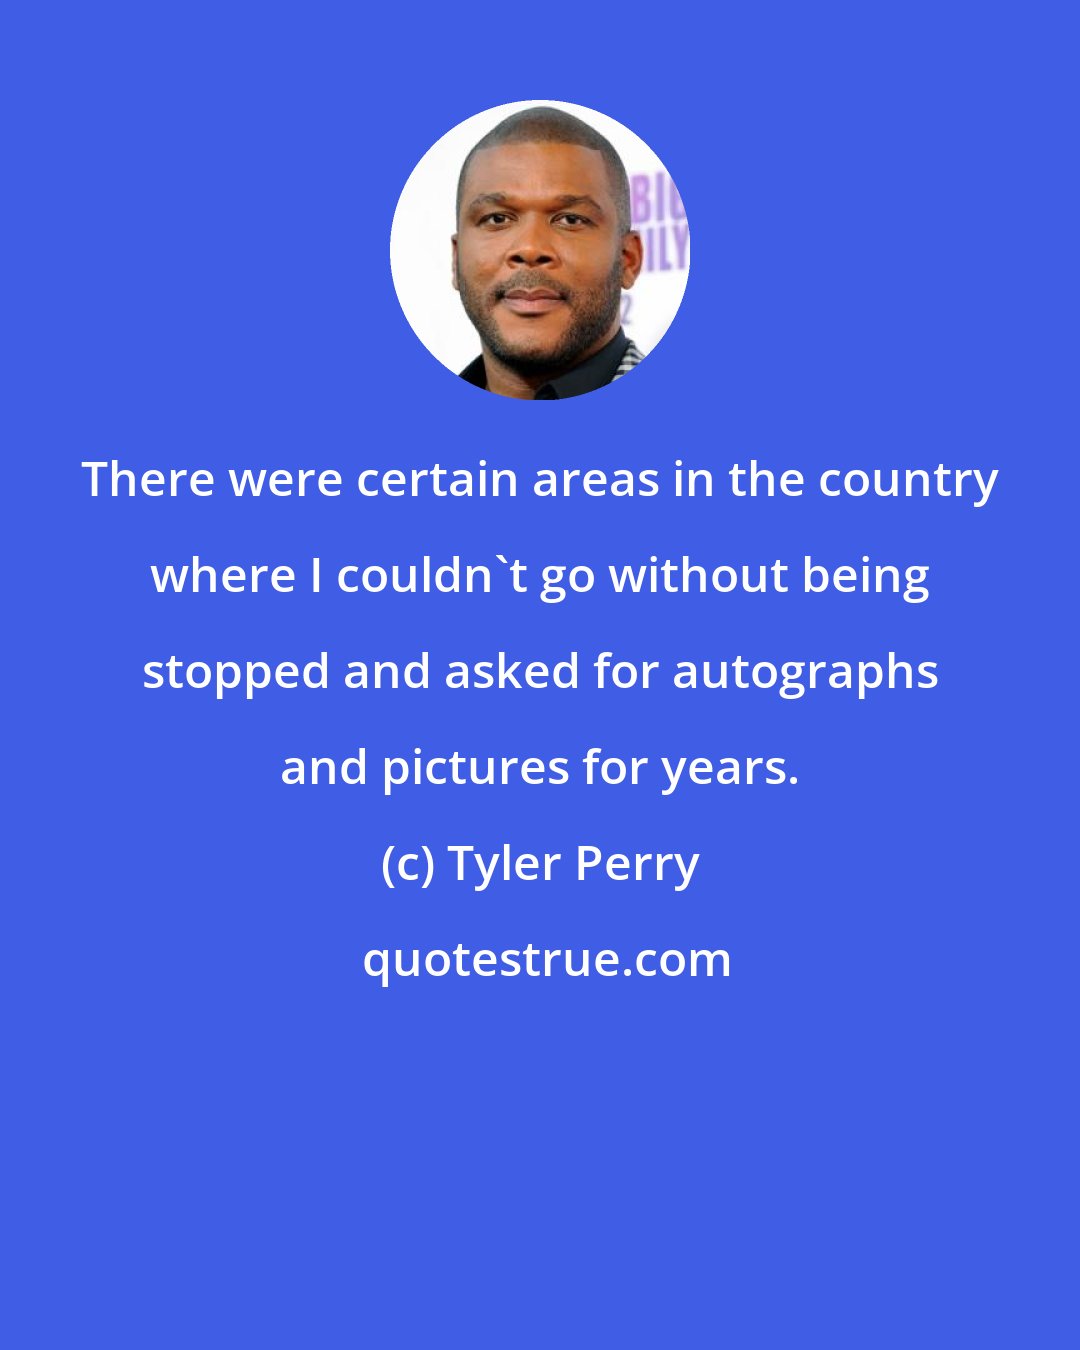 Tyler Perry: There were certain areas in the country where I couldn't go without being stopped and asked for autographs and pictures for years.